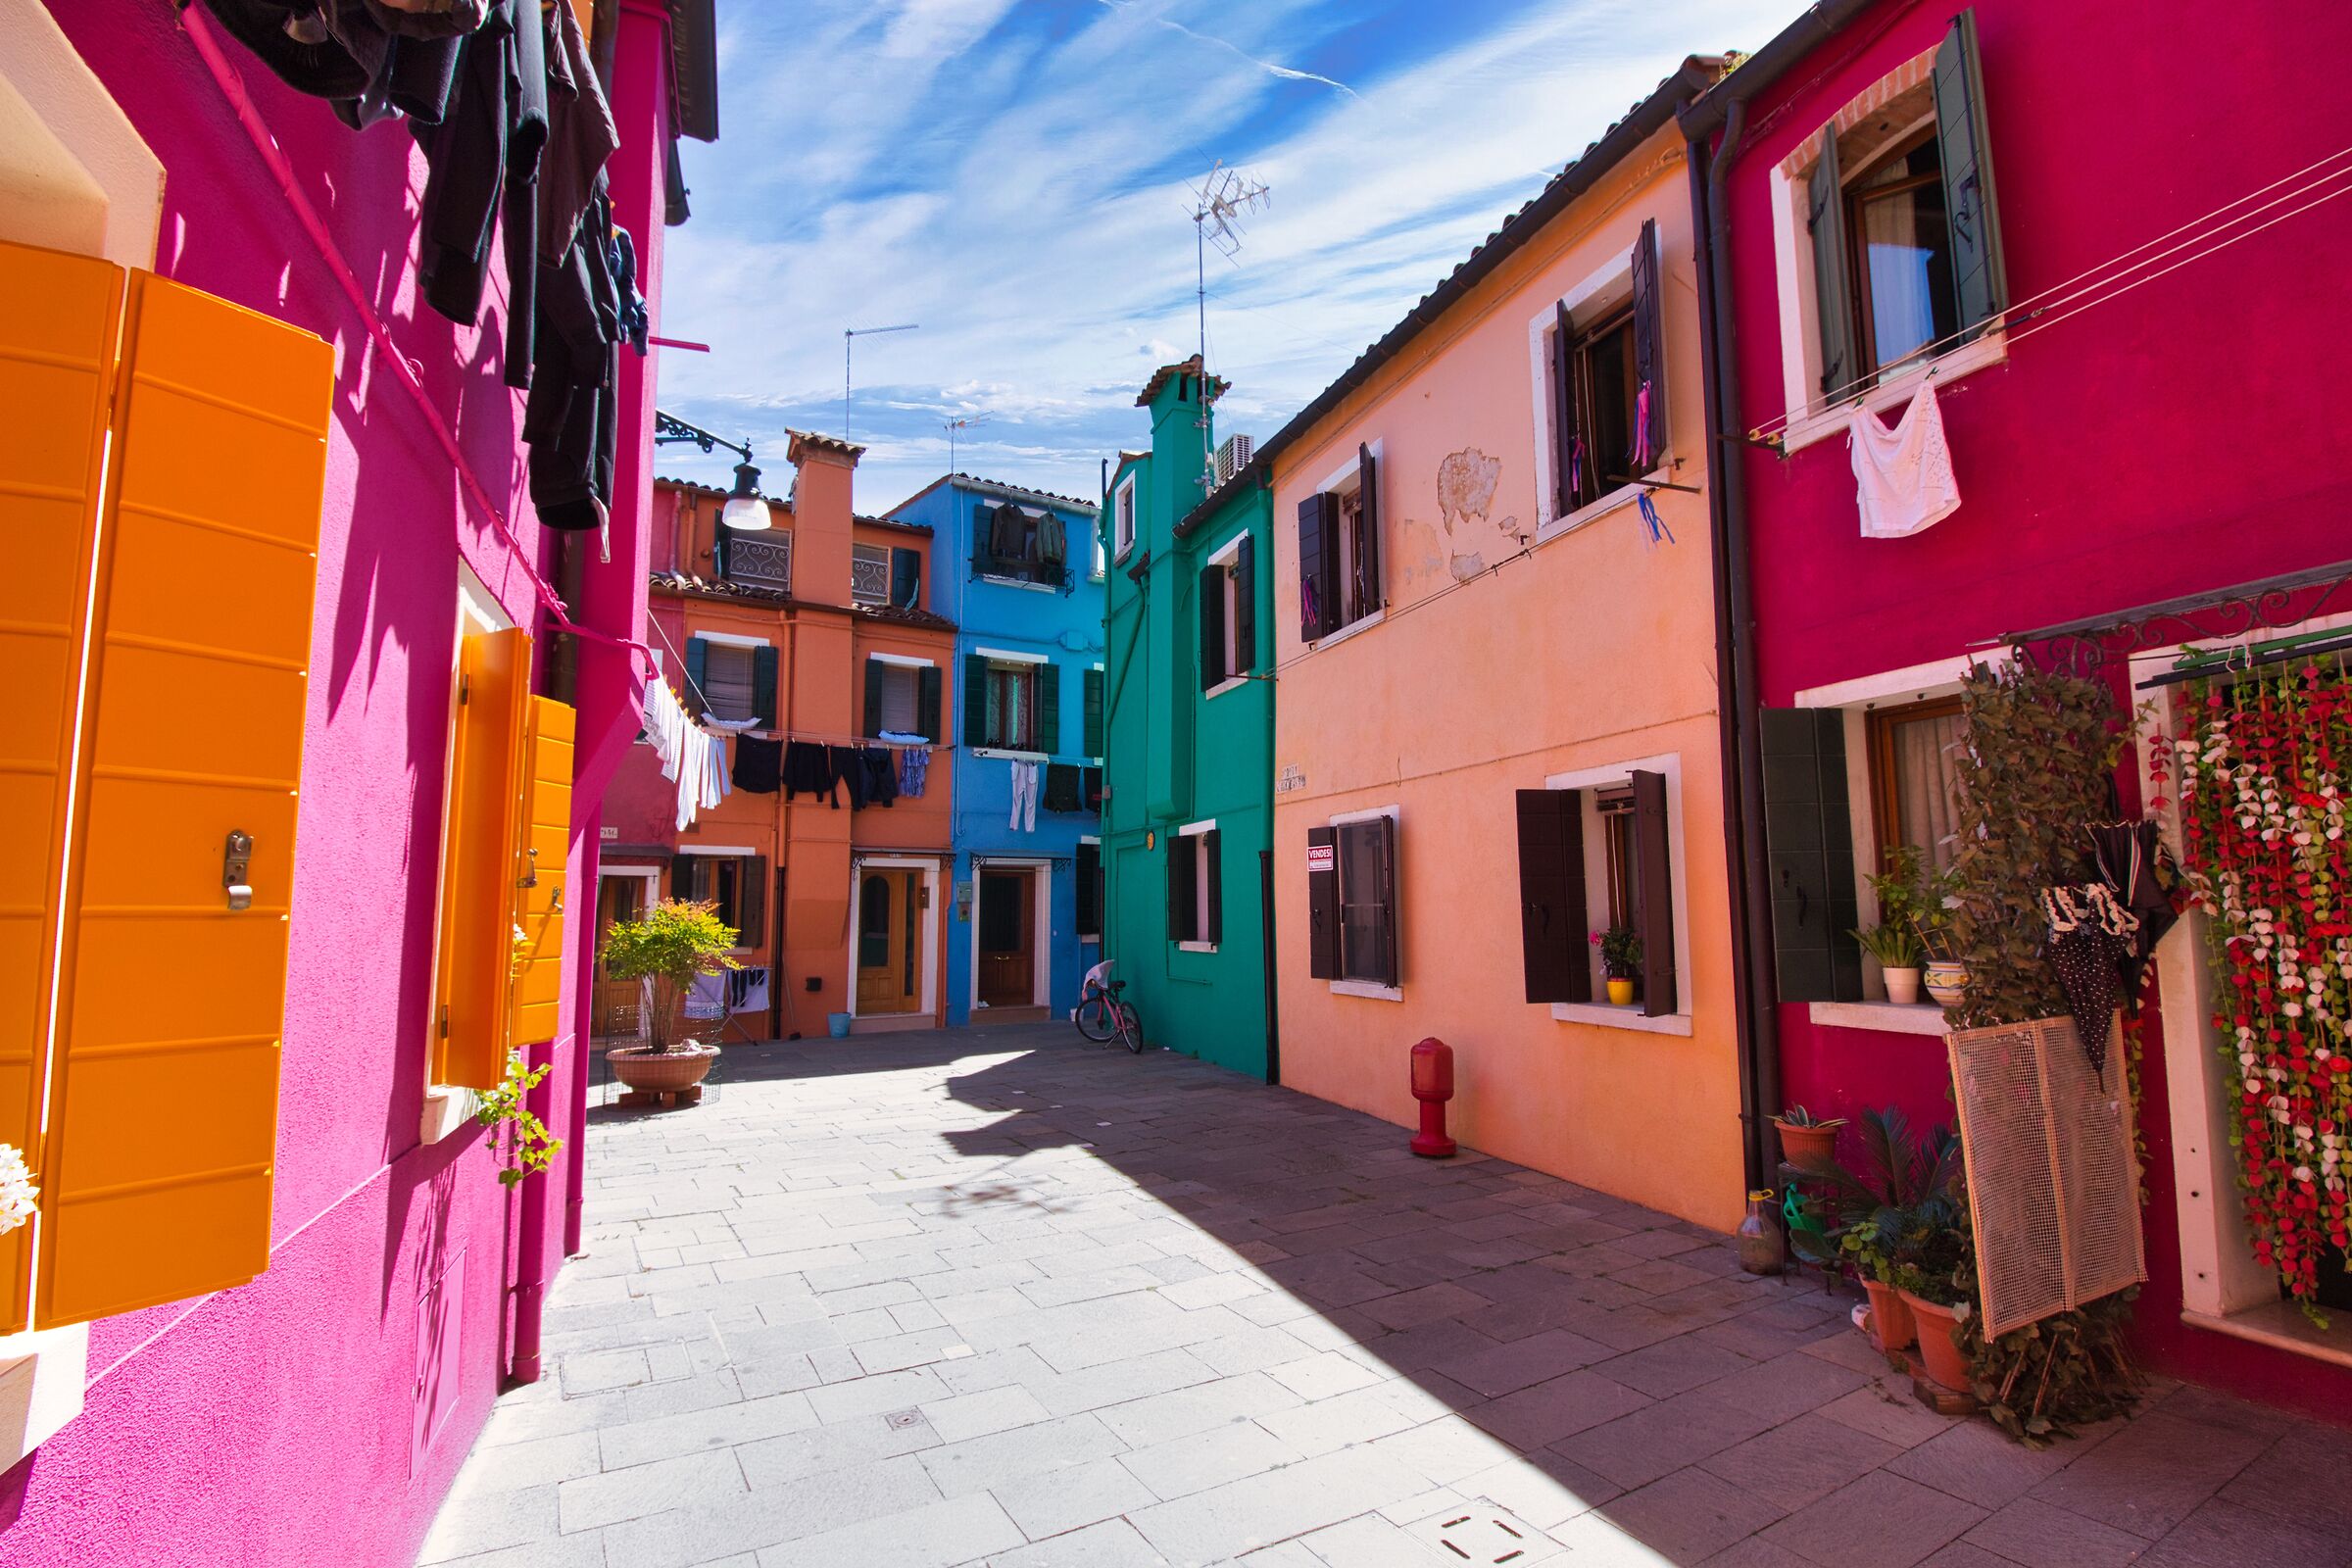 Alley of Burano...